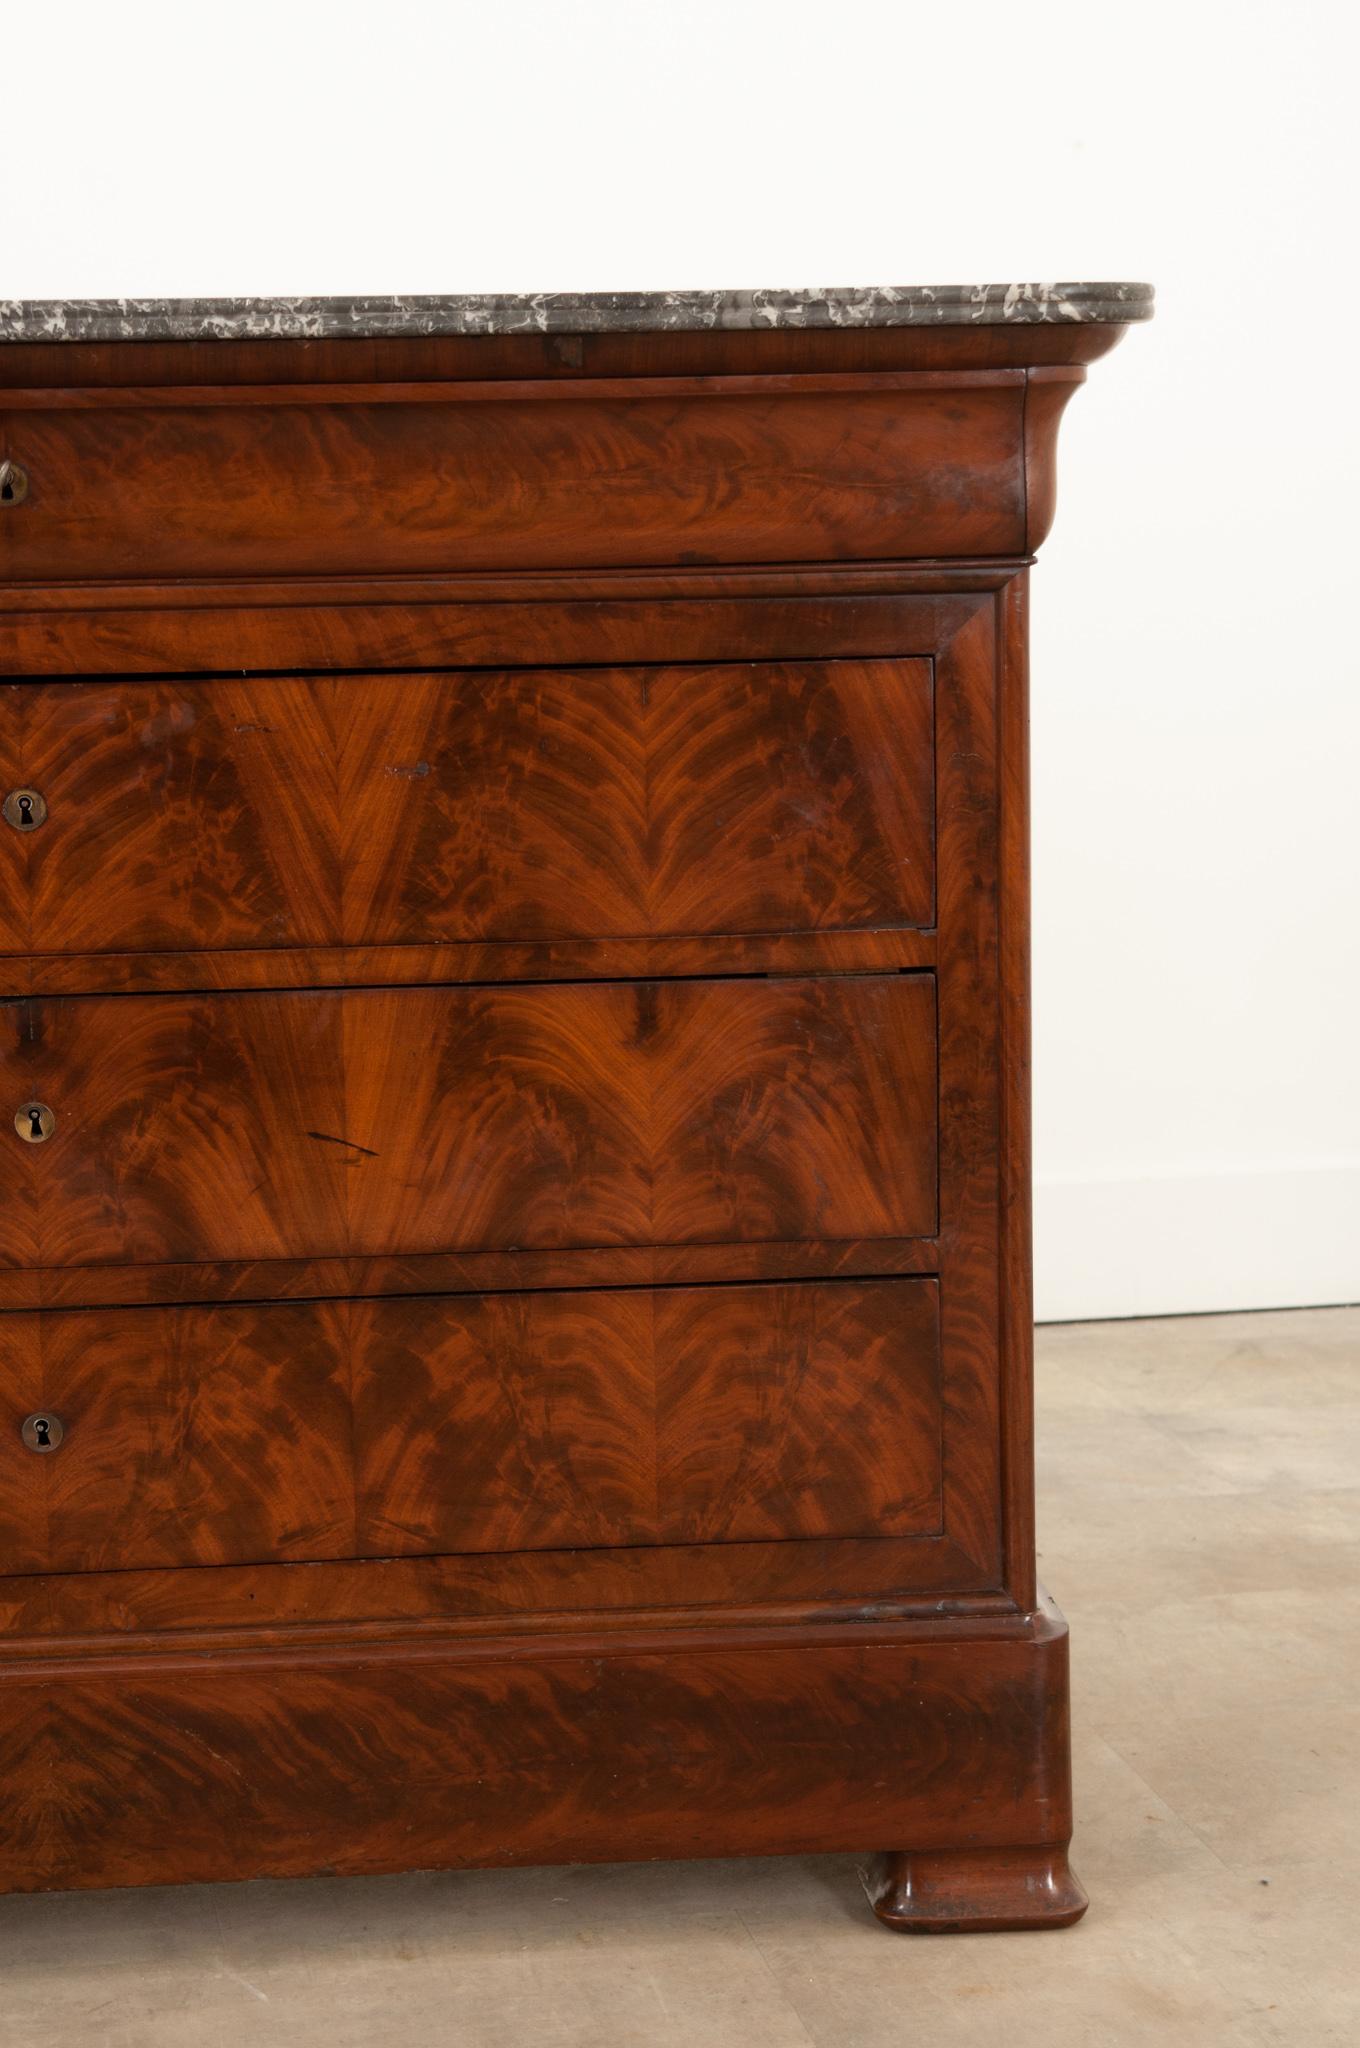 A wonderful 19th century French mahogany Louis Philippe style commode, circa 1830. The original removable marble top in superb antique condition has rounded corners and is shaped to match the base. The marble is gorgeous with dramatic charcoal and